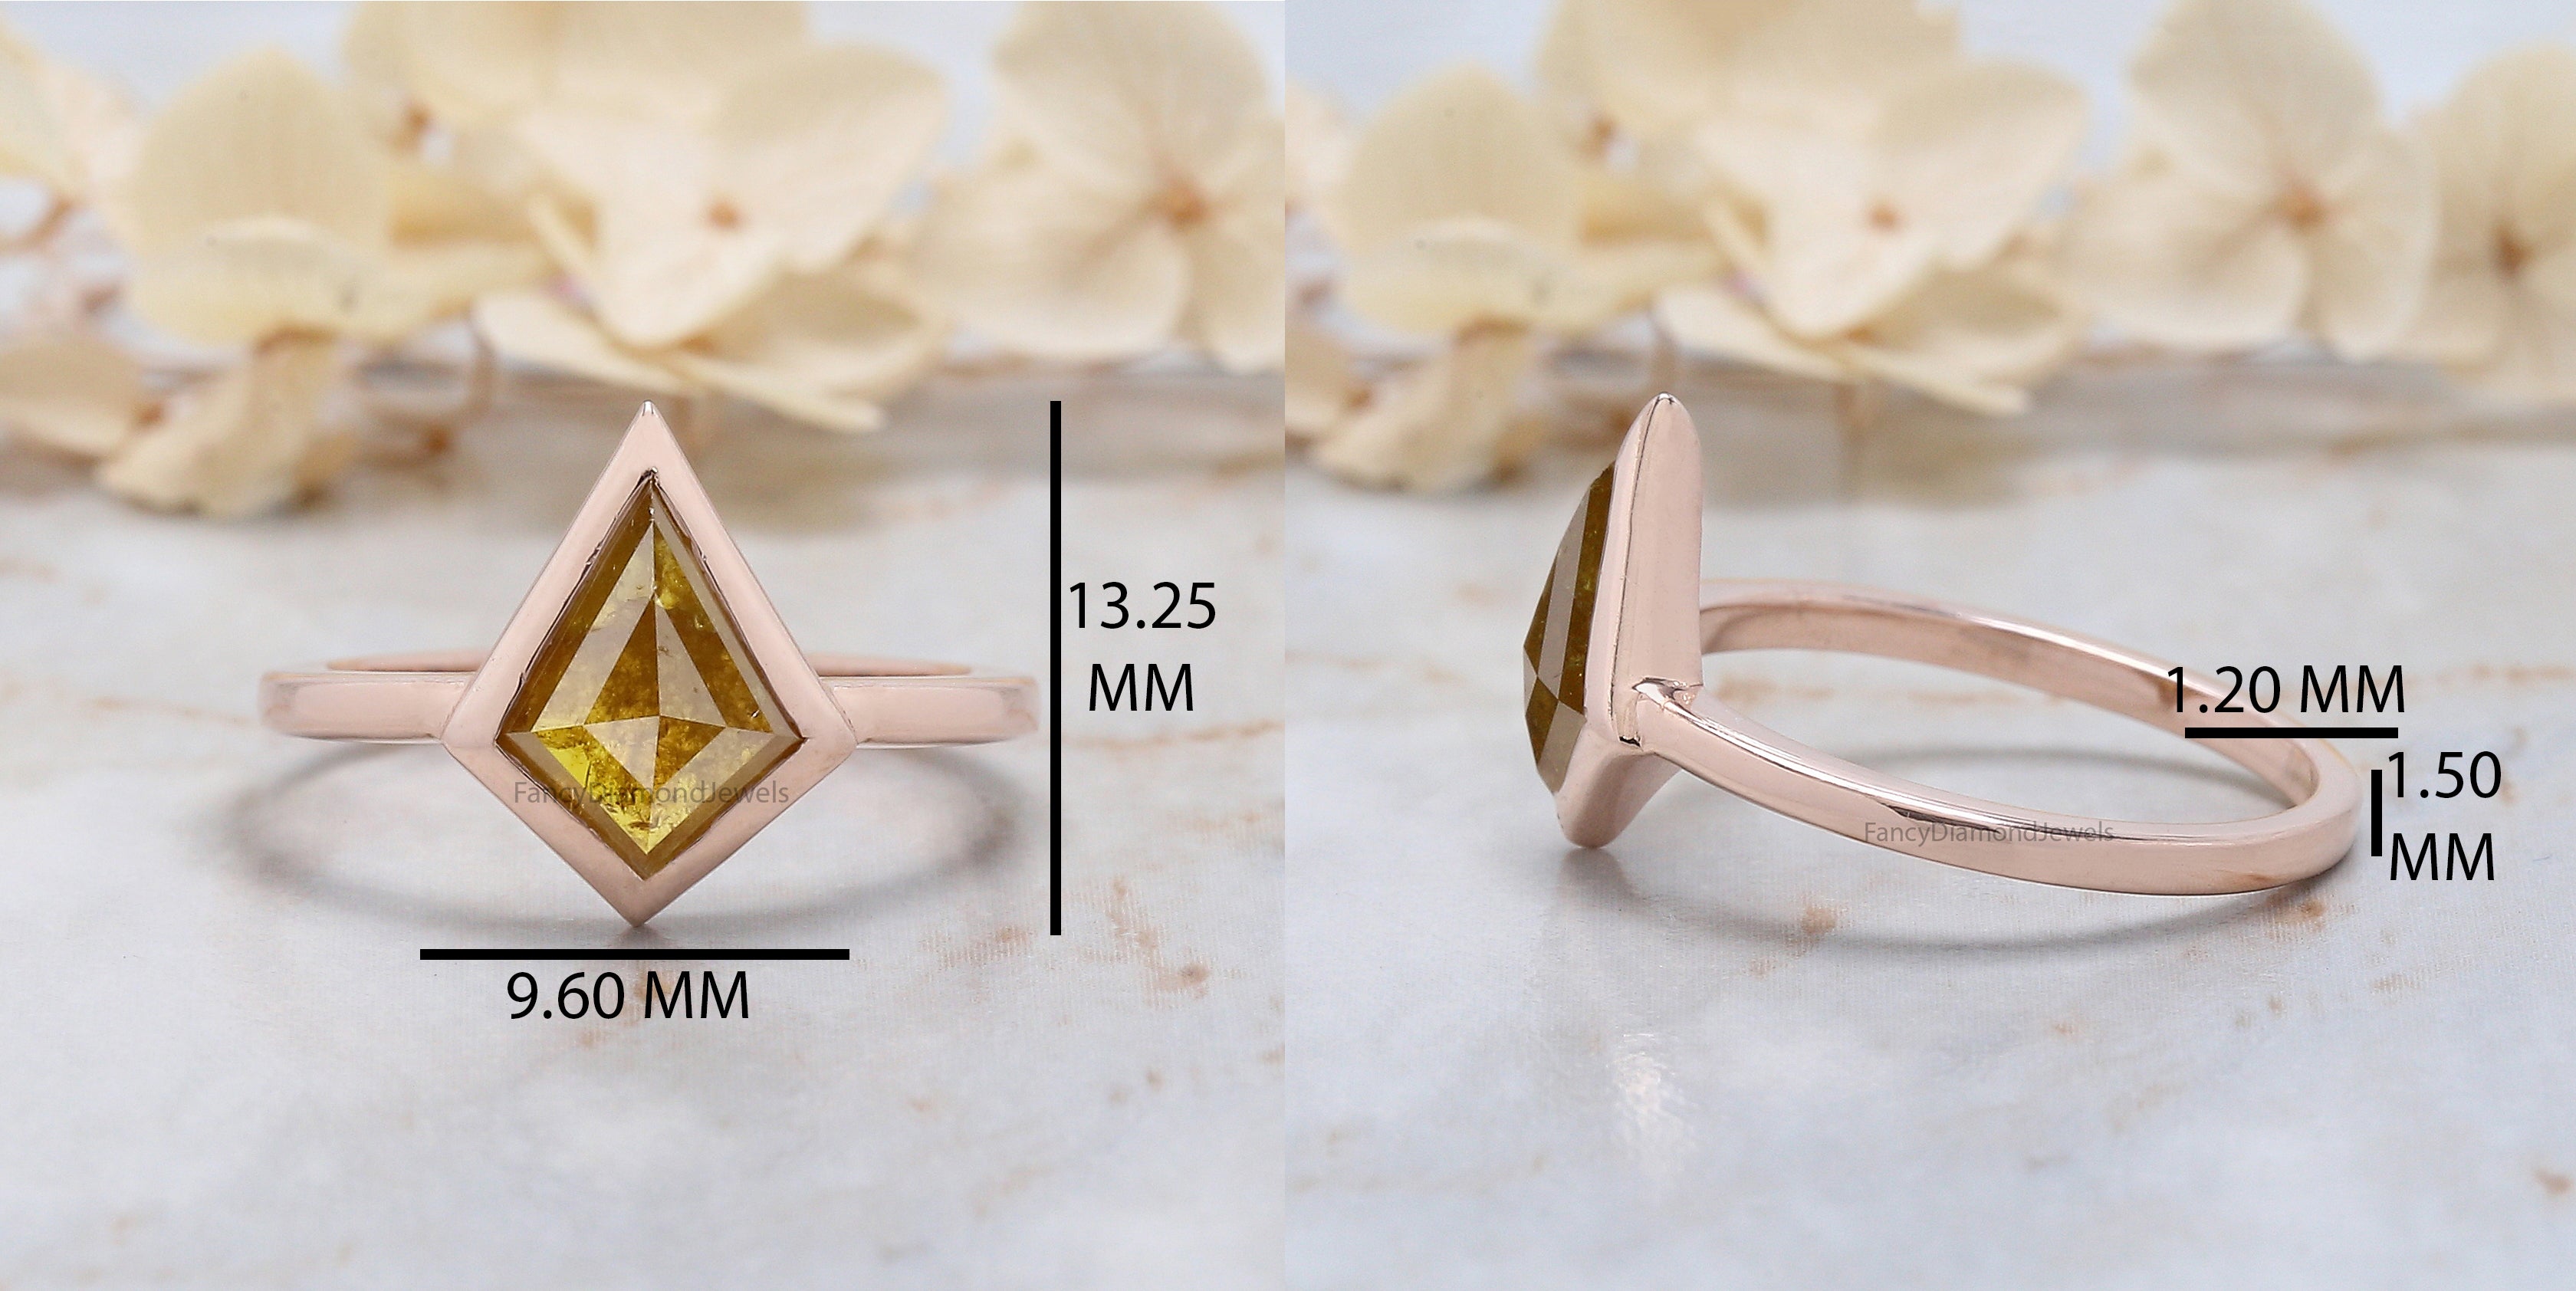 Kite Shape Yellow Color Diamond Ring 1.48 Ct 9.95 MM Kite Cut Diamond Ring 14K Solid Rose Gold Silver Engagement Ring Gift For Her QN660